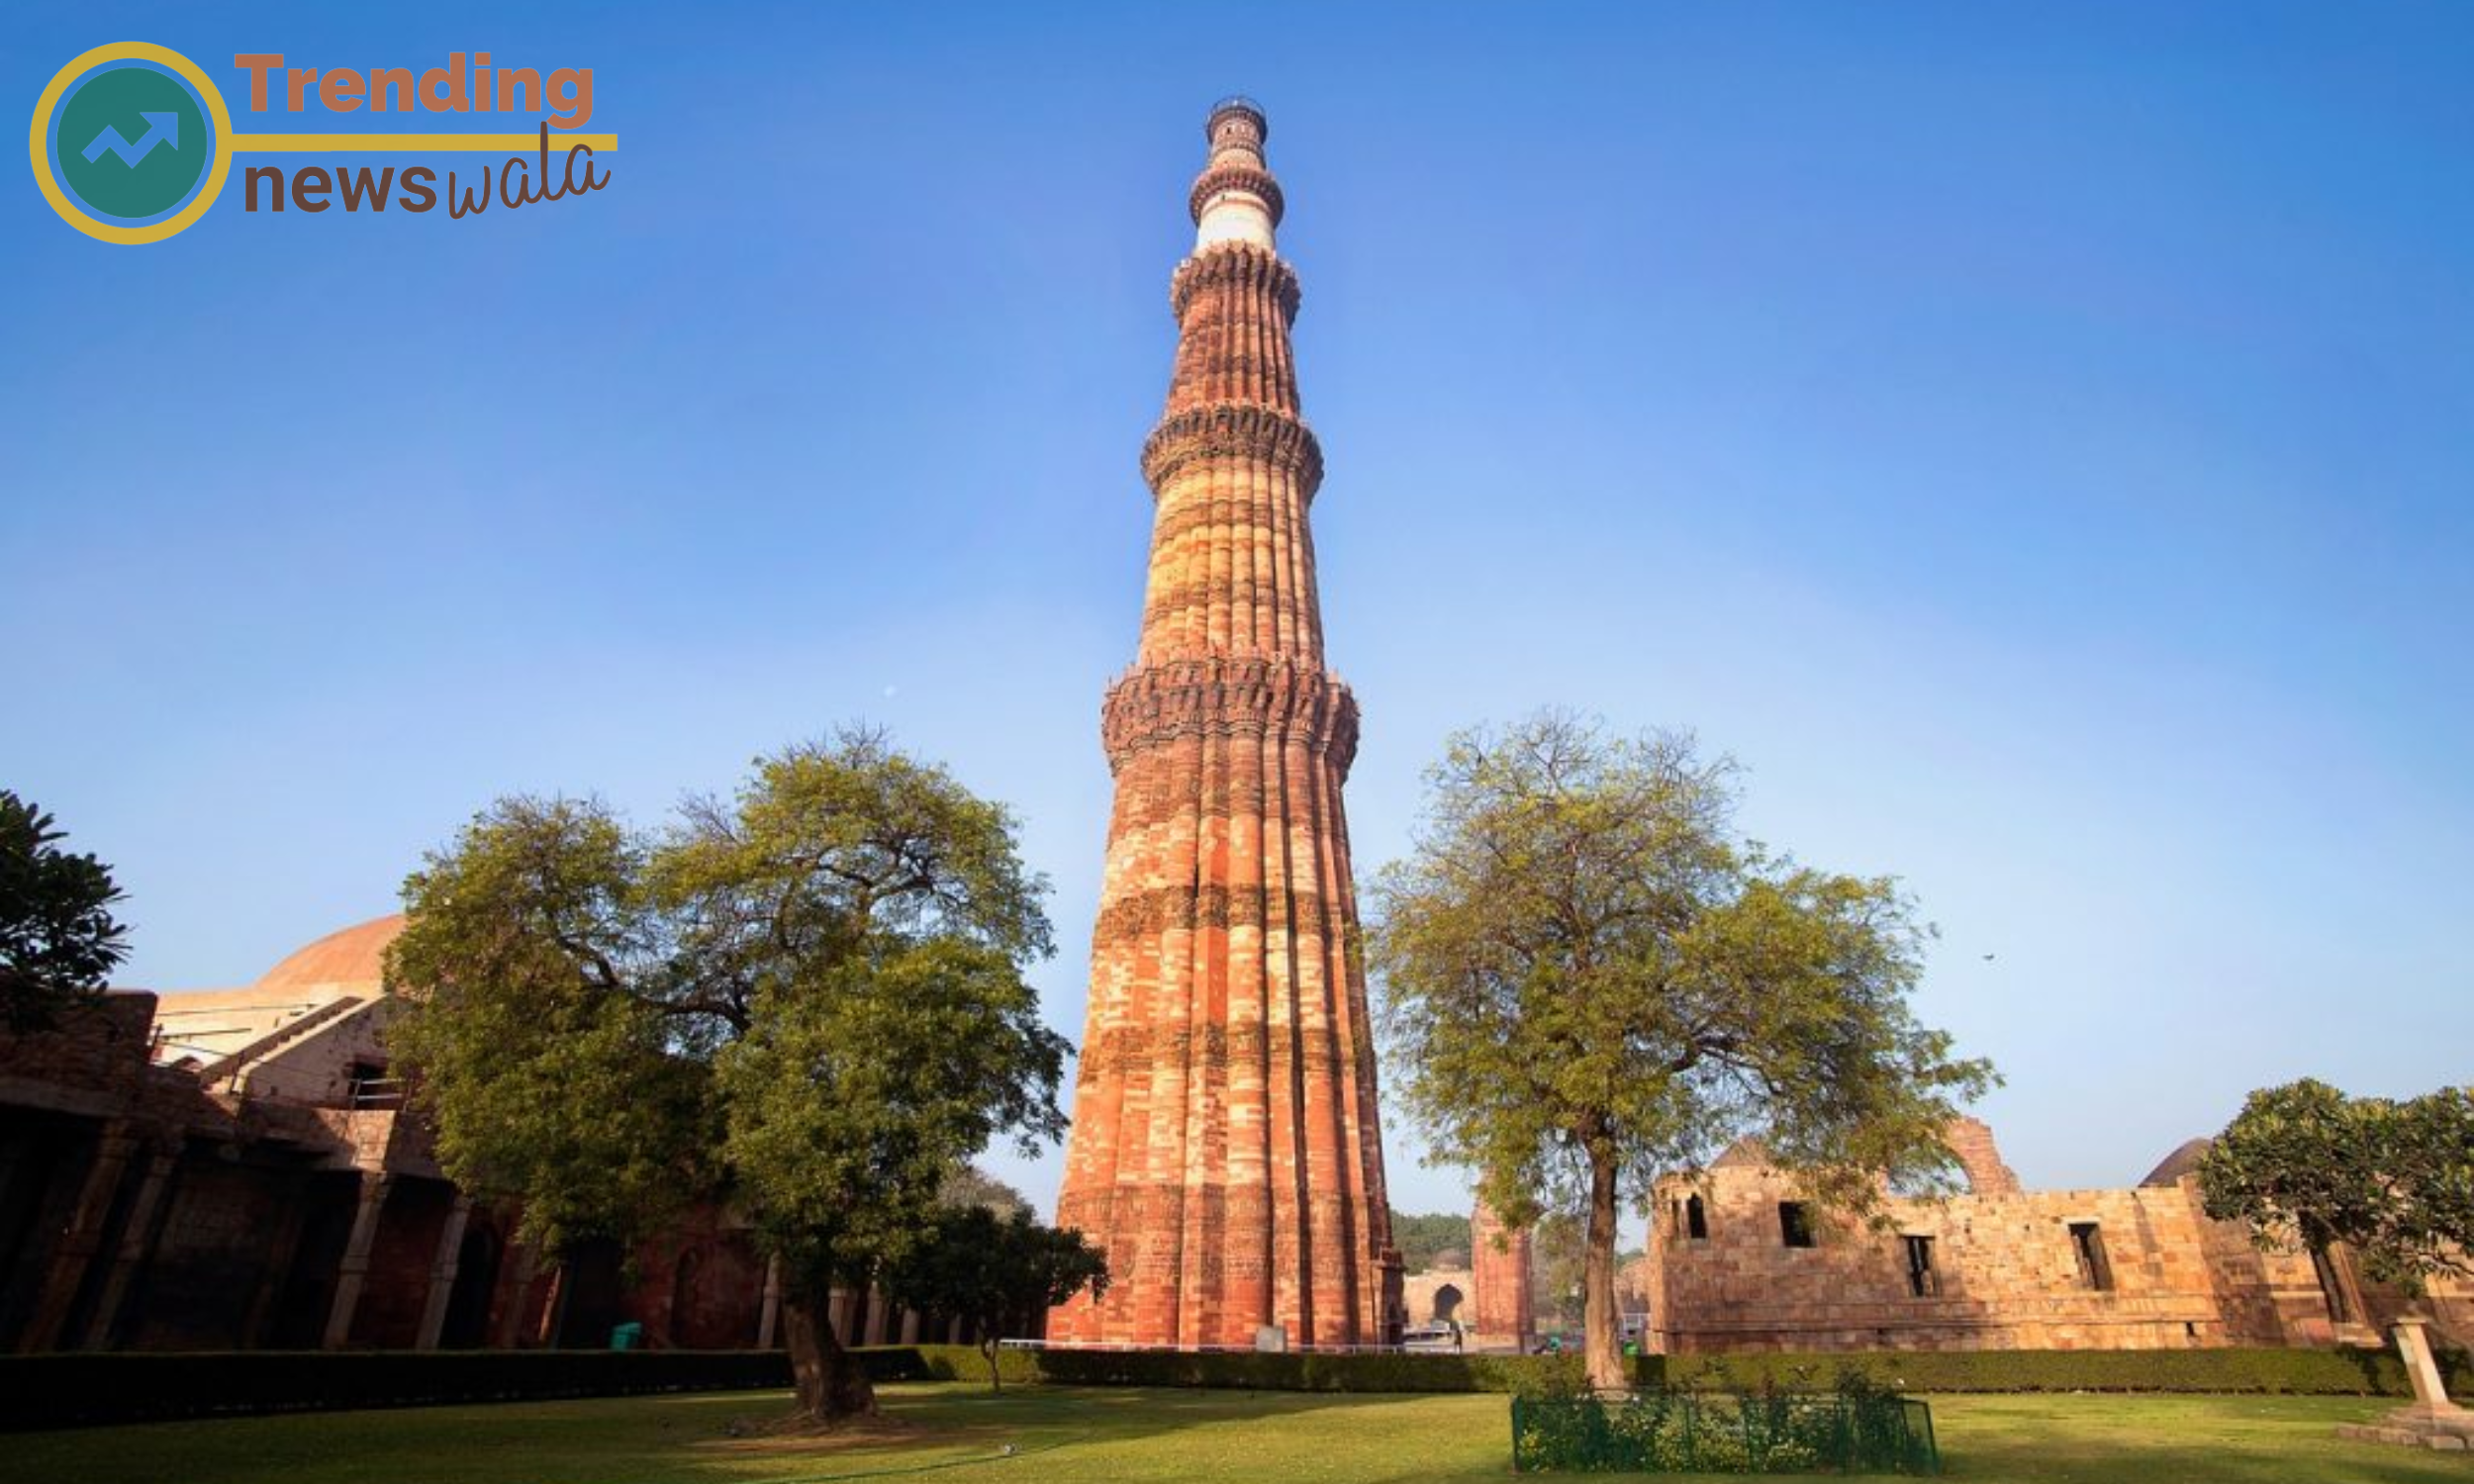 The origins of Qutub Minar are deeply rooted in history